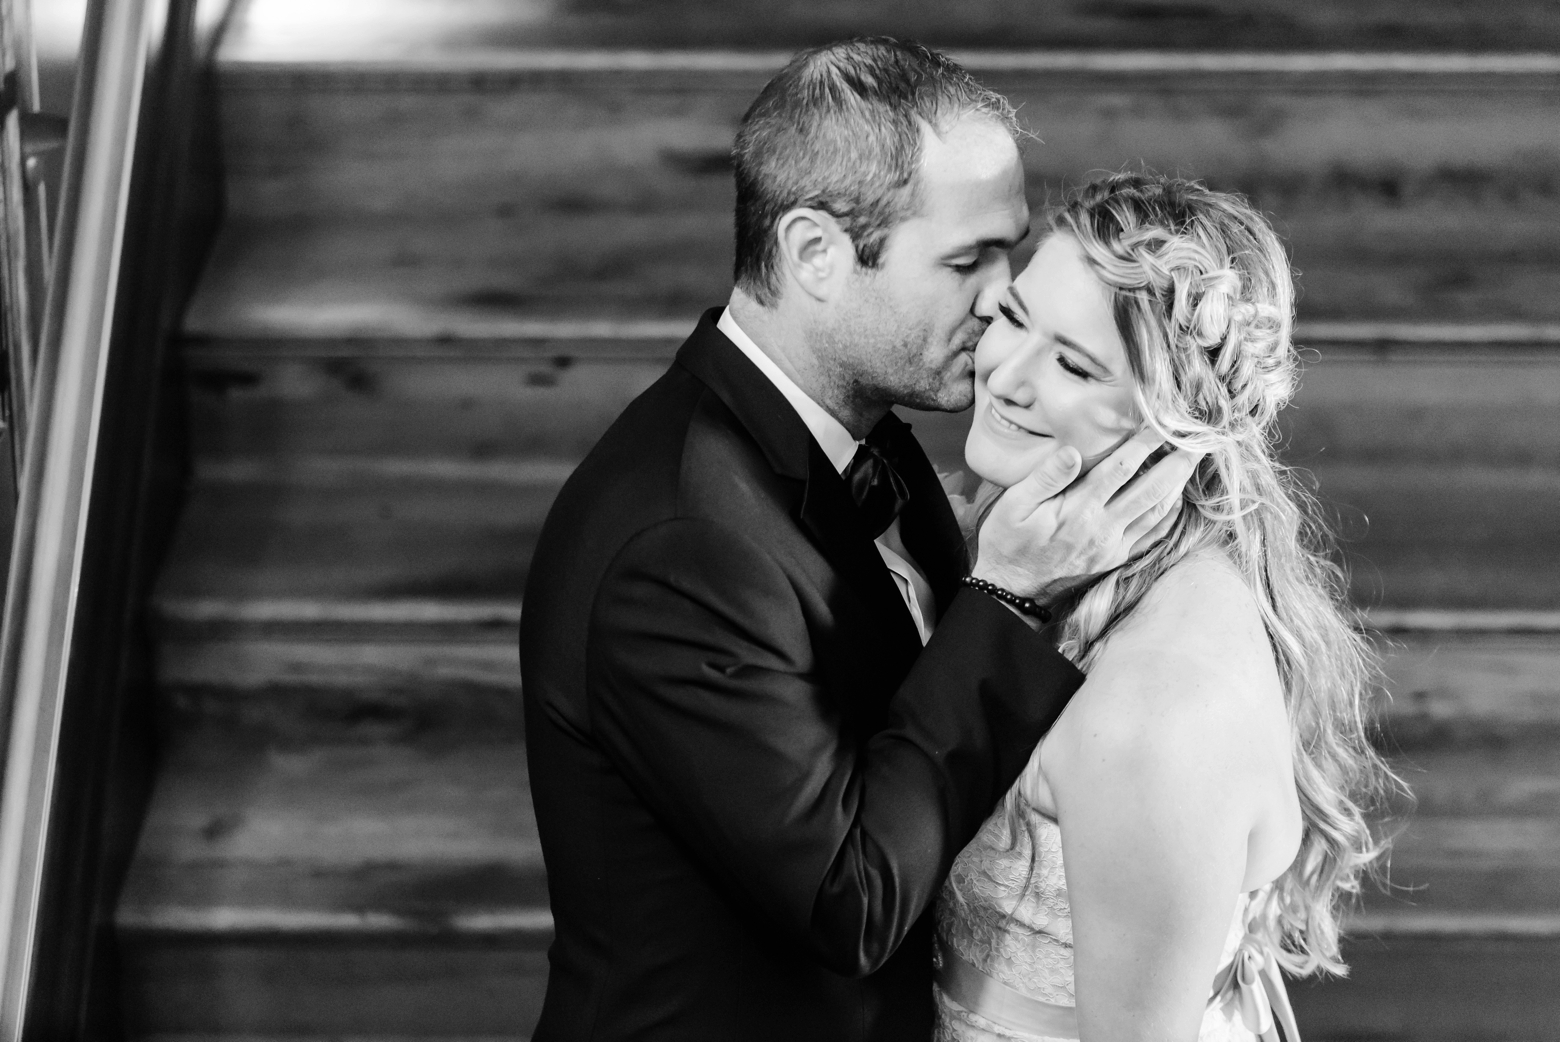 Groom kisses his Bride on the cheek in black and white